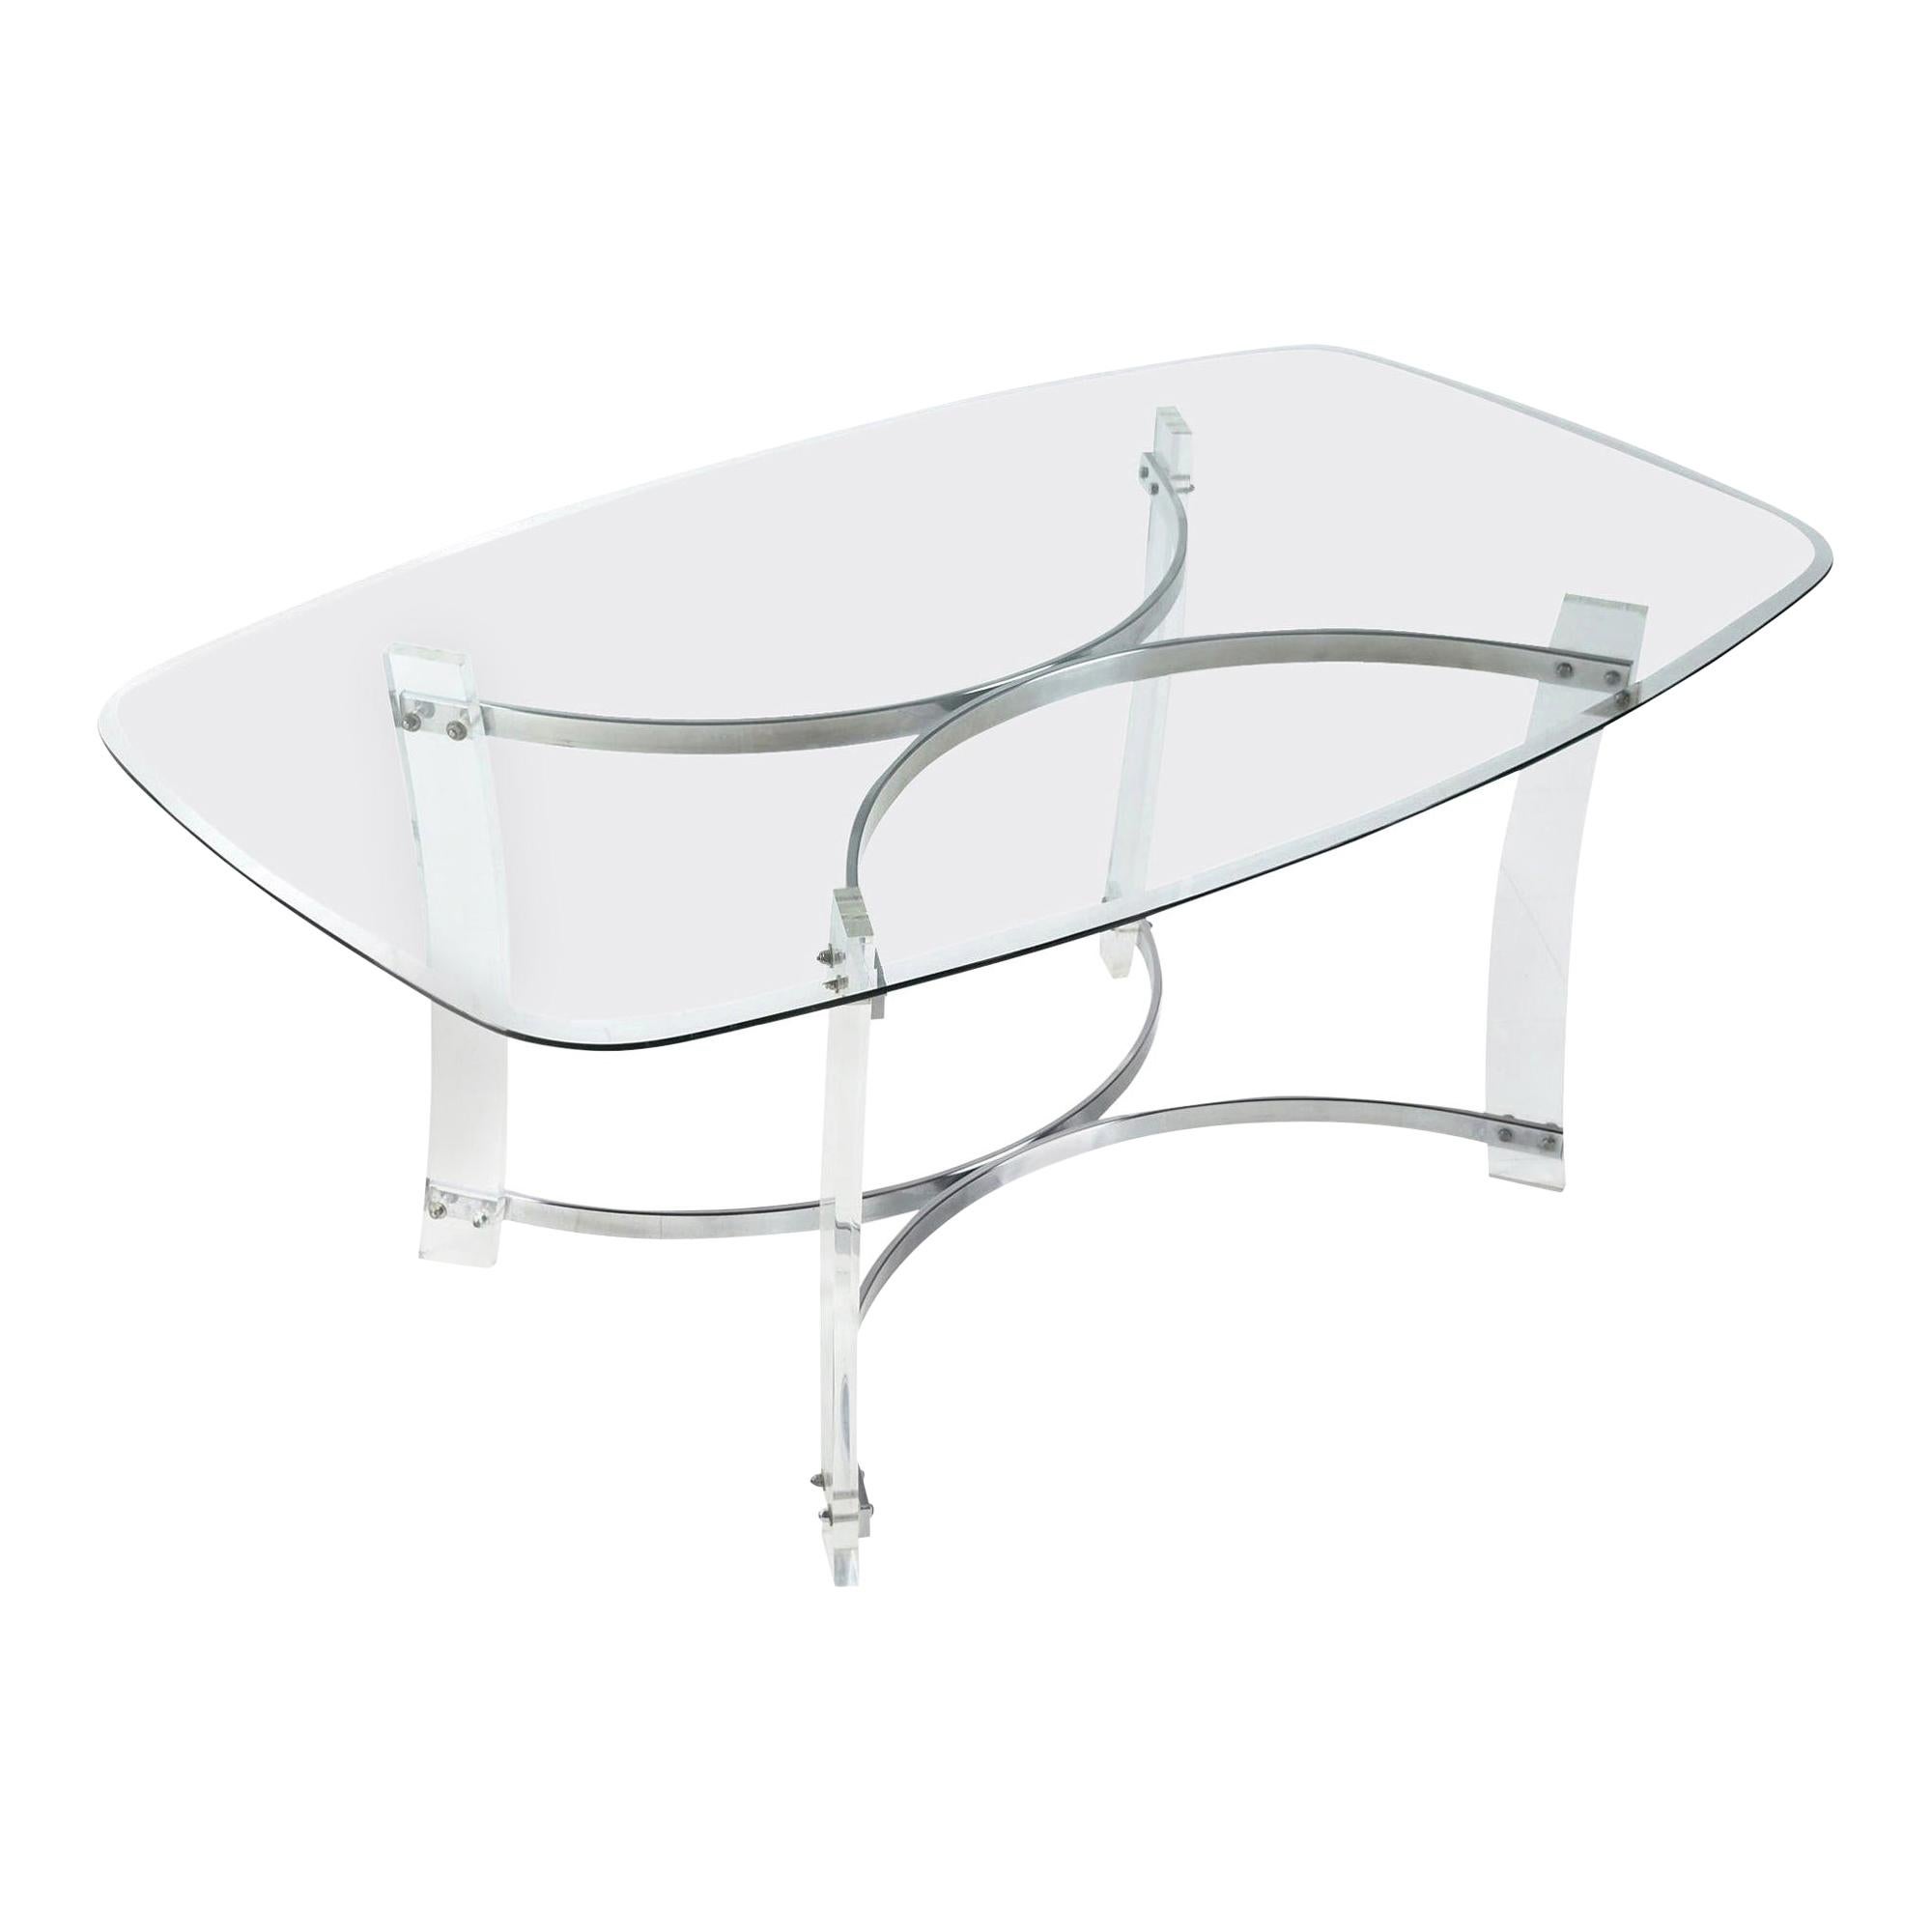 Vintage 1980s Charles Hollis Jones style Lucite and chrome dining table with glass top. The beveled glass top has a bowed, rounded rectangular silhouette mimicking the dynamic contours of the table base. Chrome spanners convex at the bottom and top,